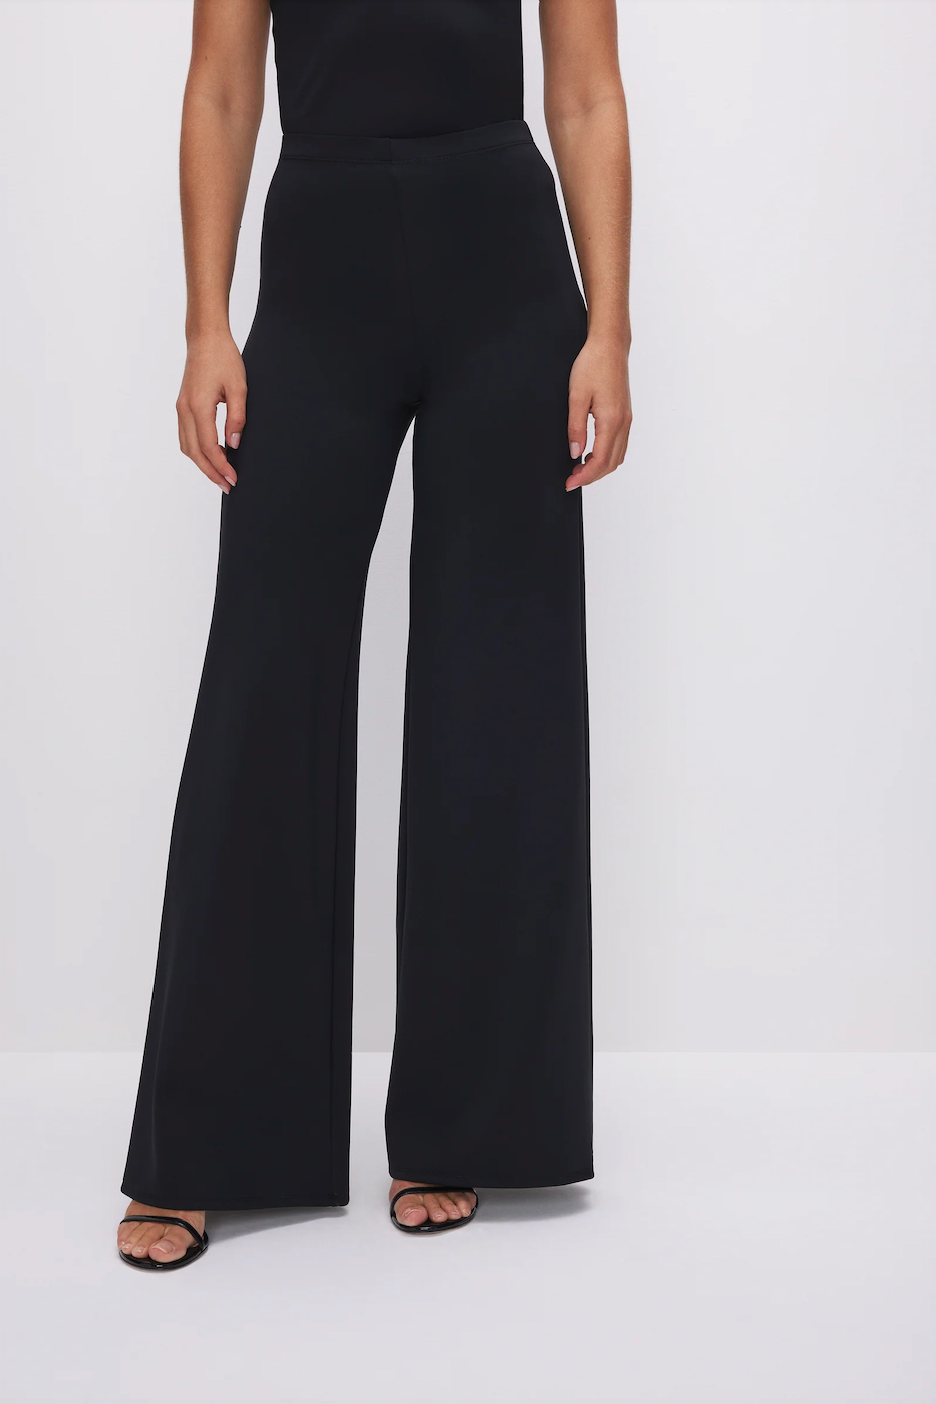 Scuba Pull On Palazzo Pants Black, Pant Bottom by Good American | LIT Boutique